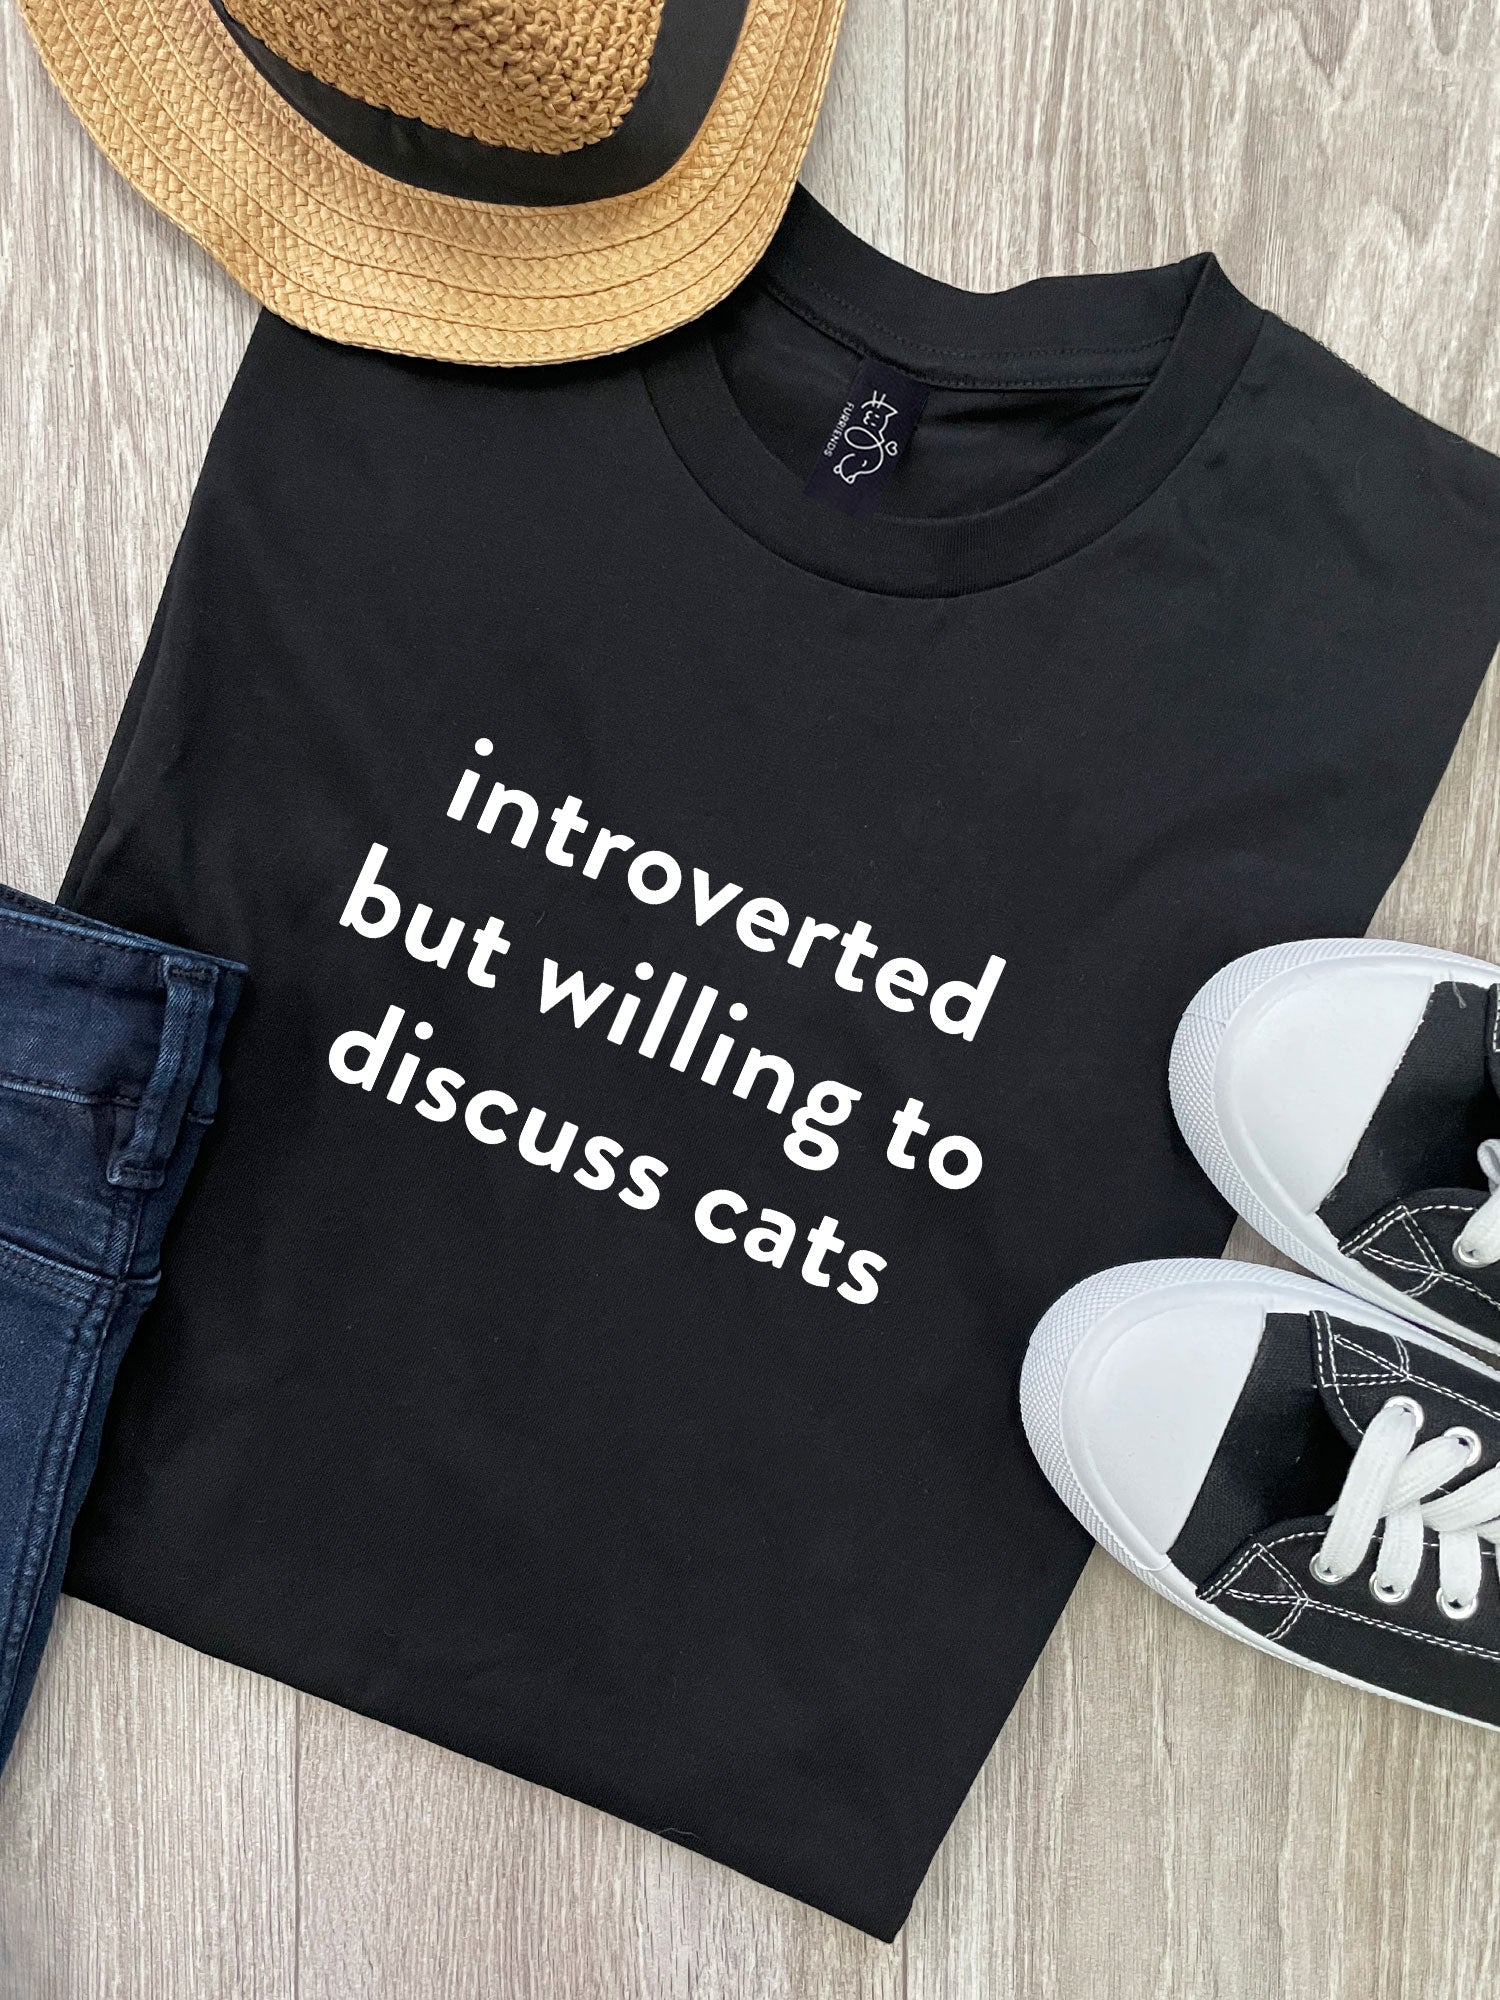 Introverted But Willing to Discuss Cats